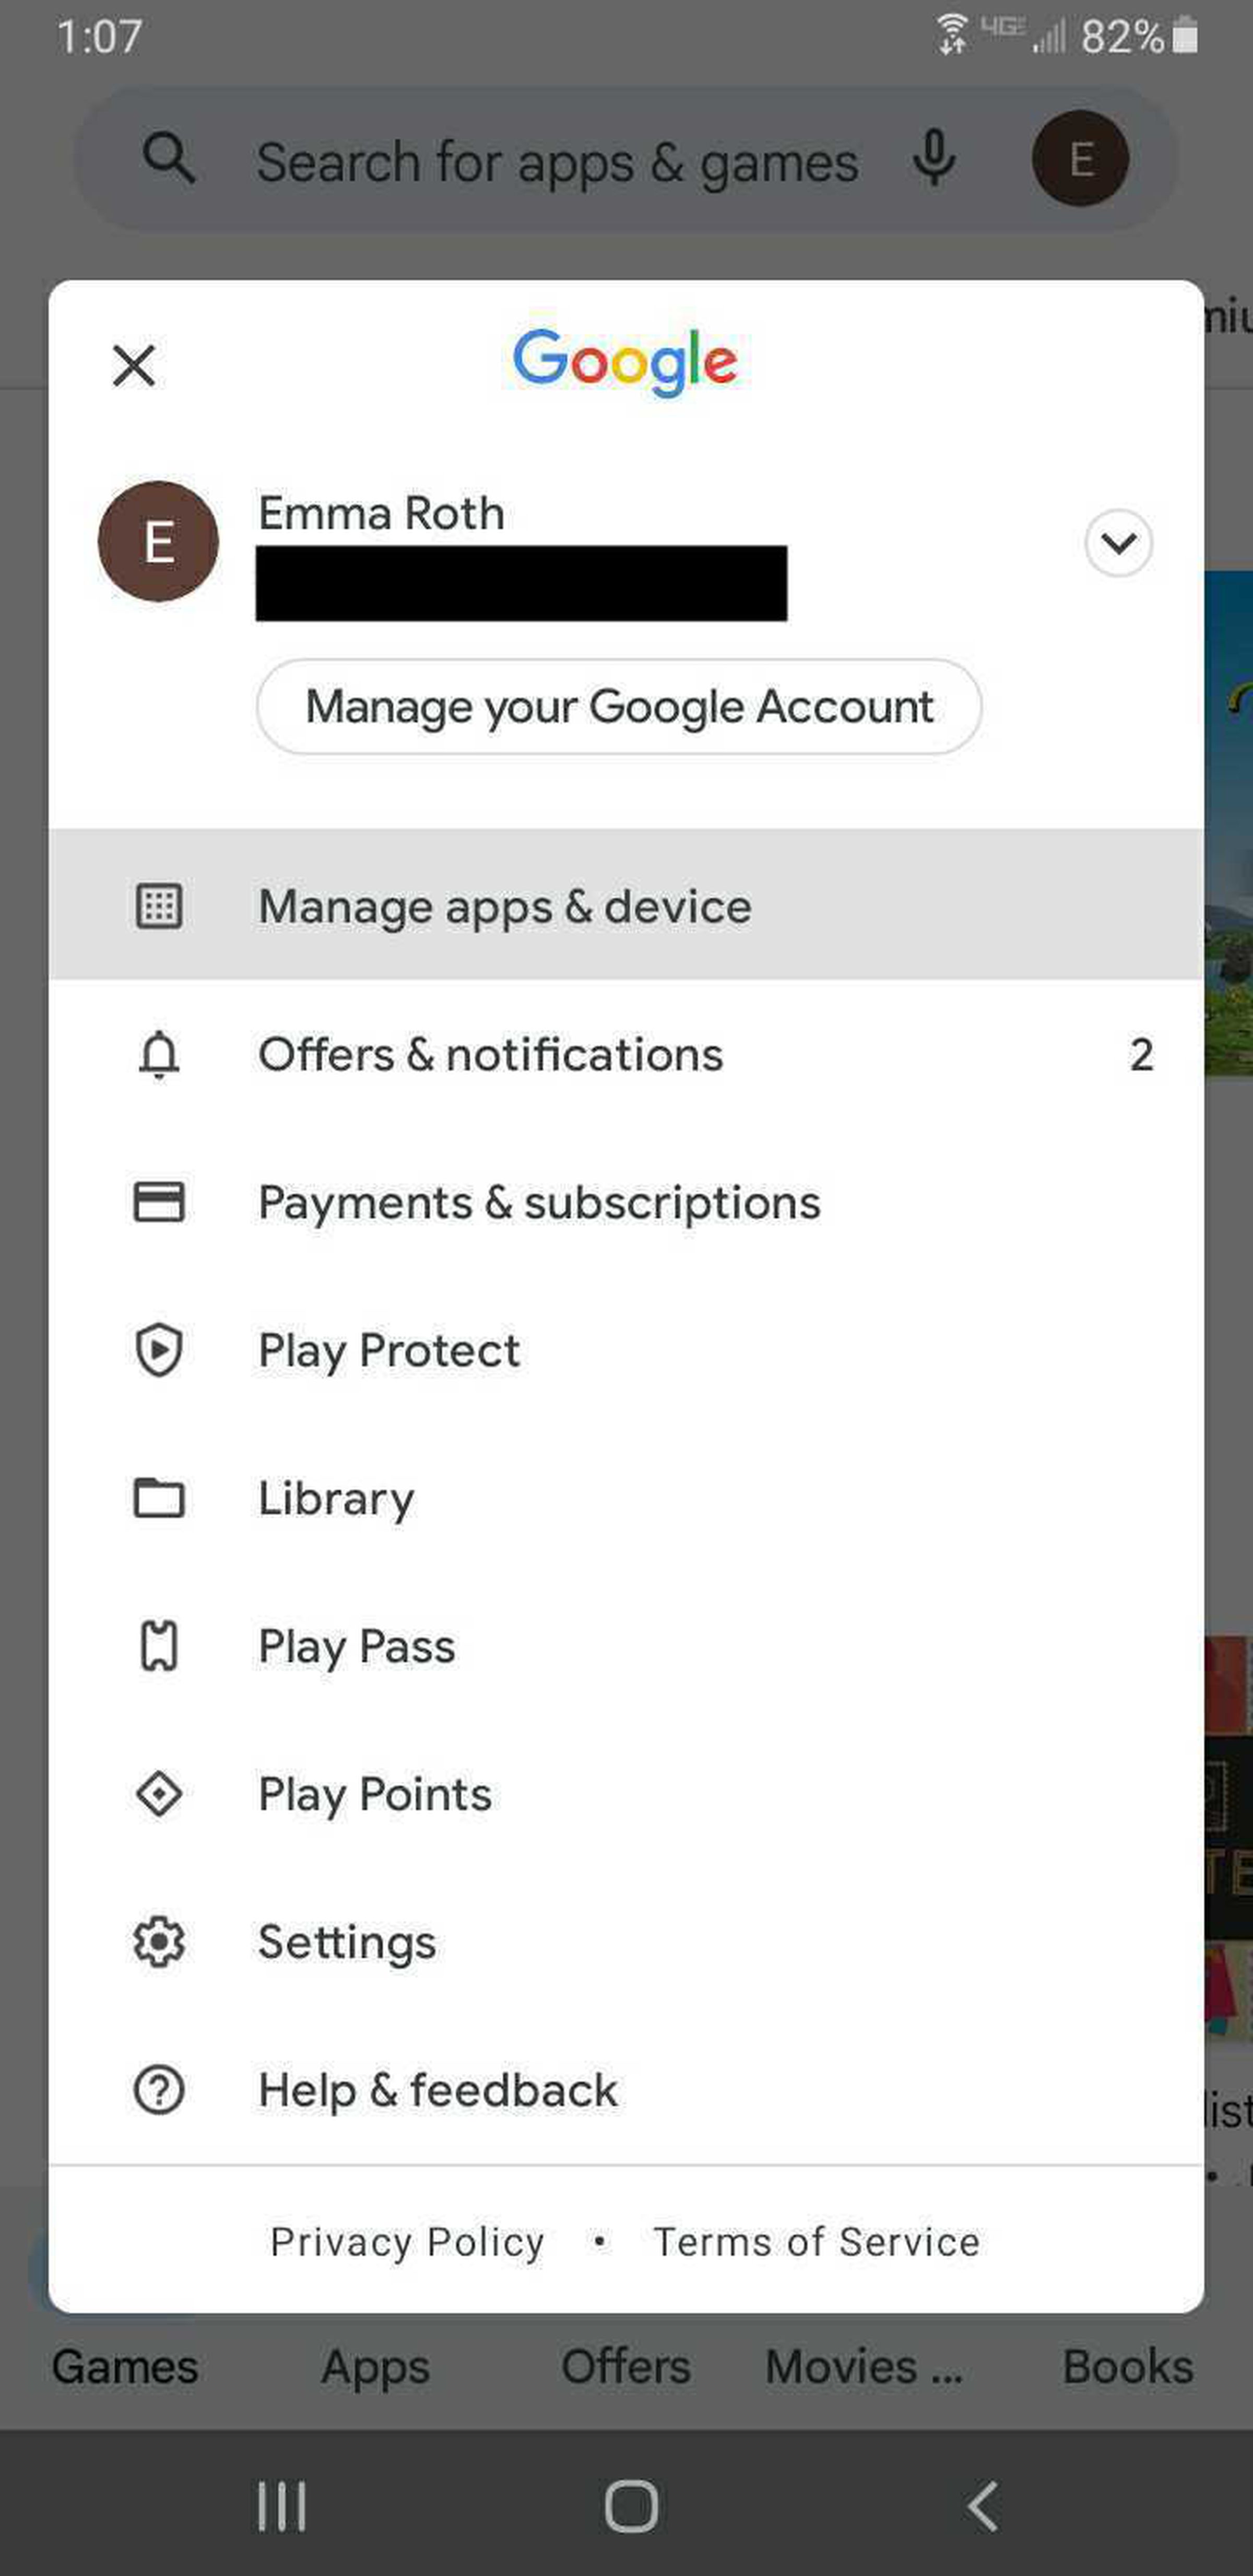 Choose “Manage apps & device.”